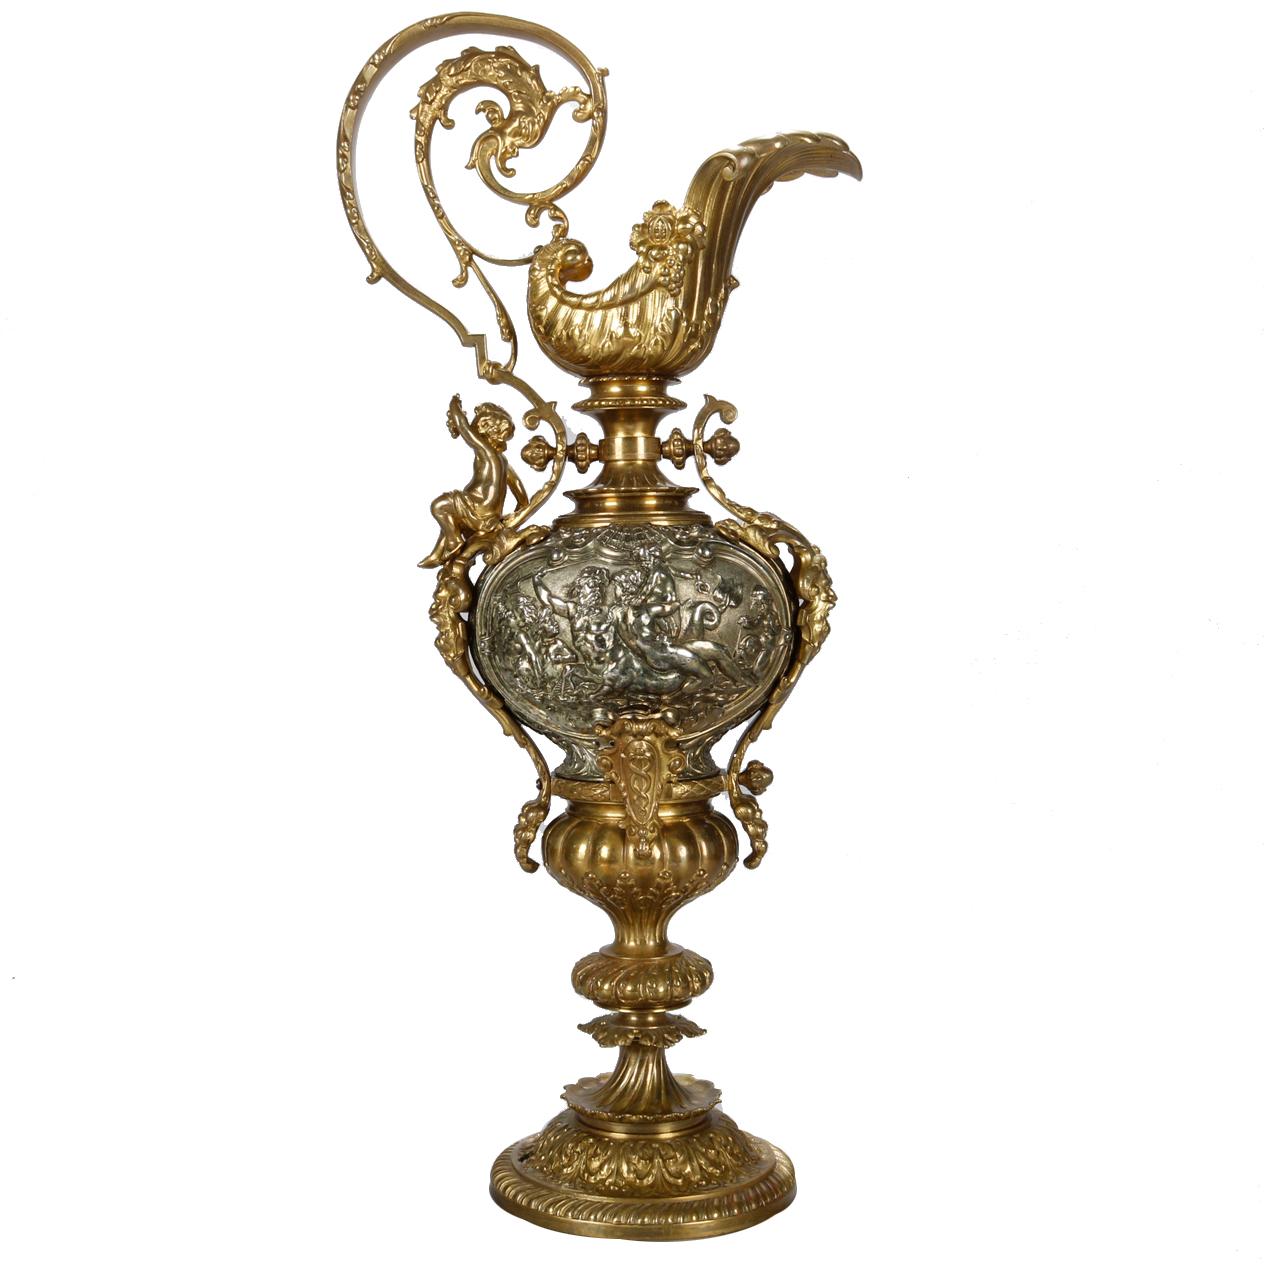 An antique and large Classical Italian Baroque lamp base offers ewer form with partial gilt bronze and white metal construction having scrolled foliate handle and stylize gilt shell form spout surmounting urn base with relief Classical Greek scene,